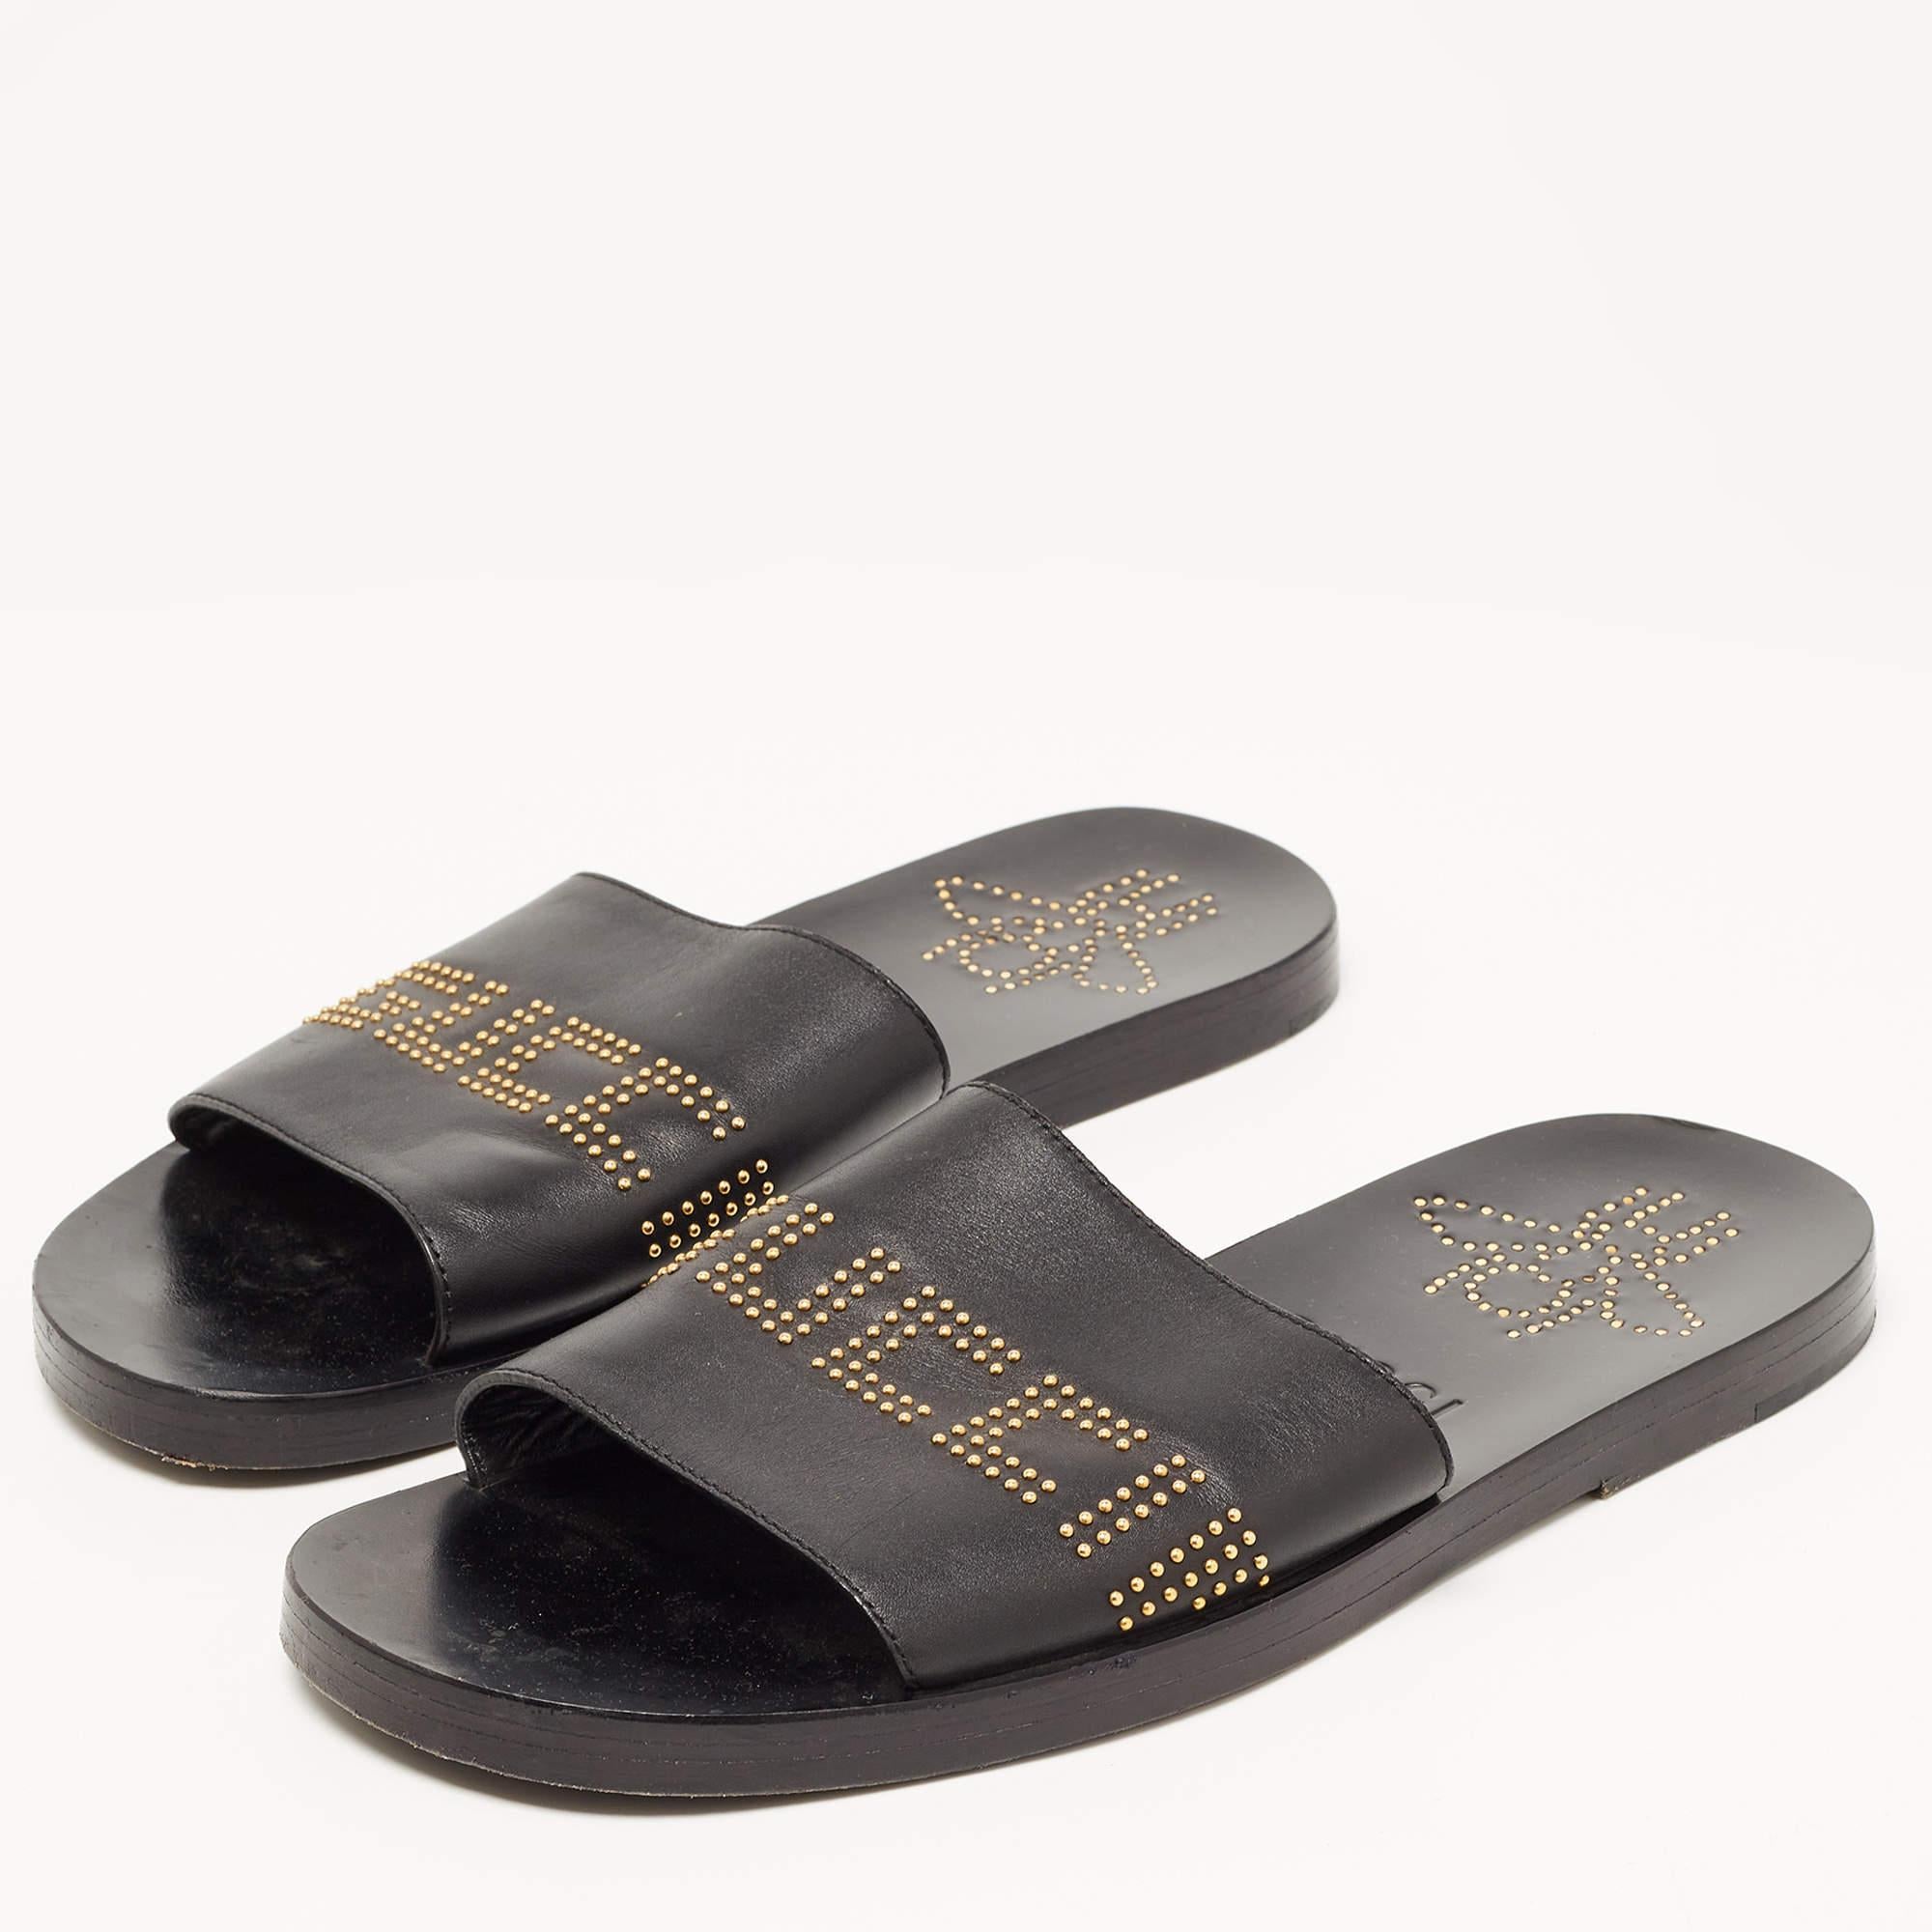 Enhance your casual looks with a touch of high style with these designer slides. Rendered in quality material with a lovely hue adorning its expanse, this pair is a must-have!

